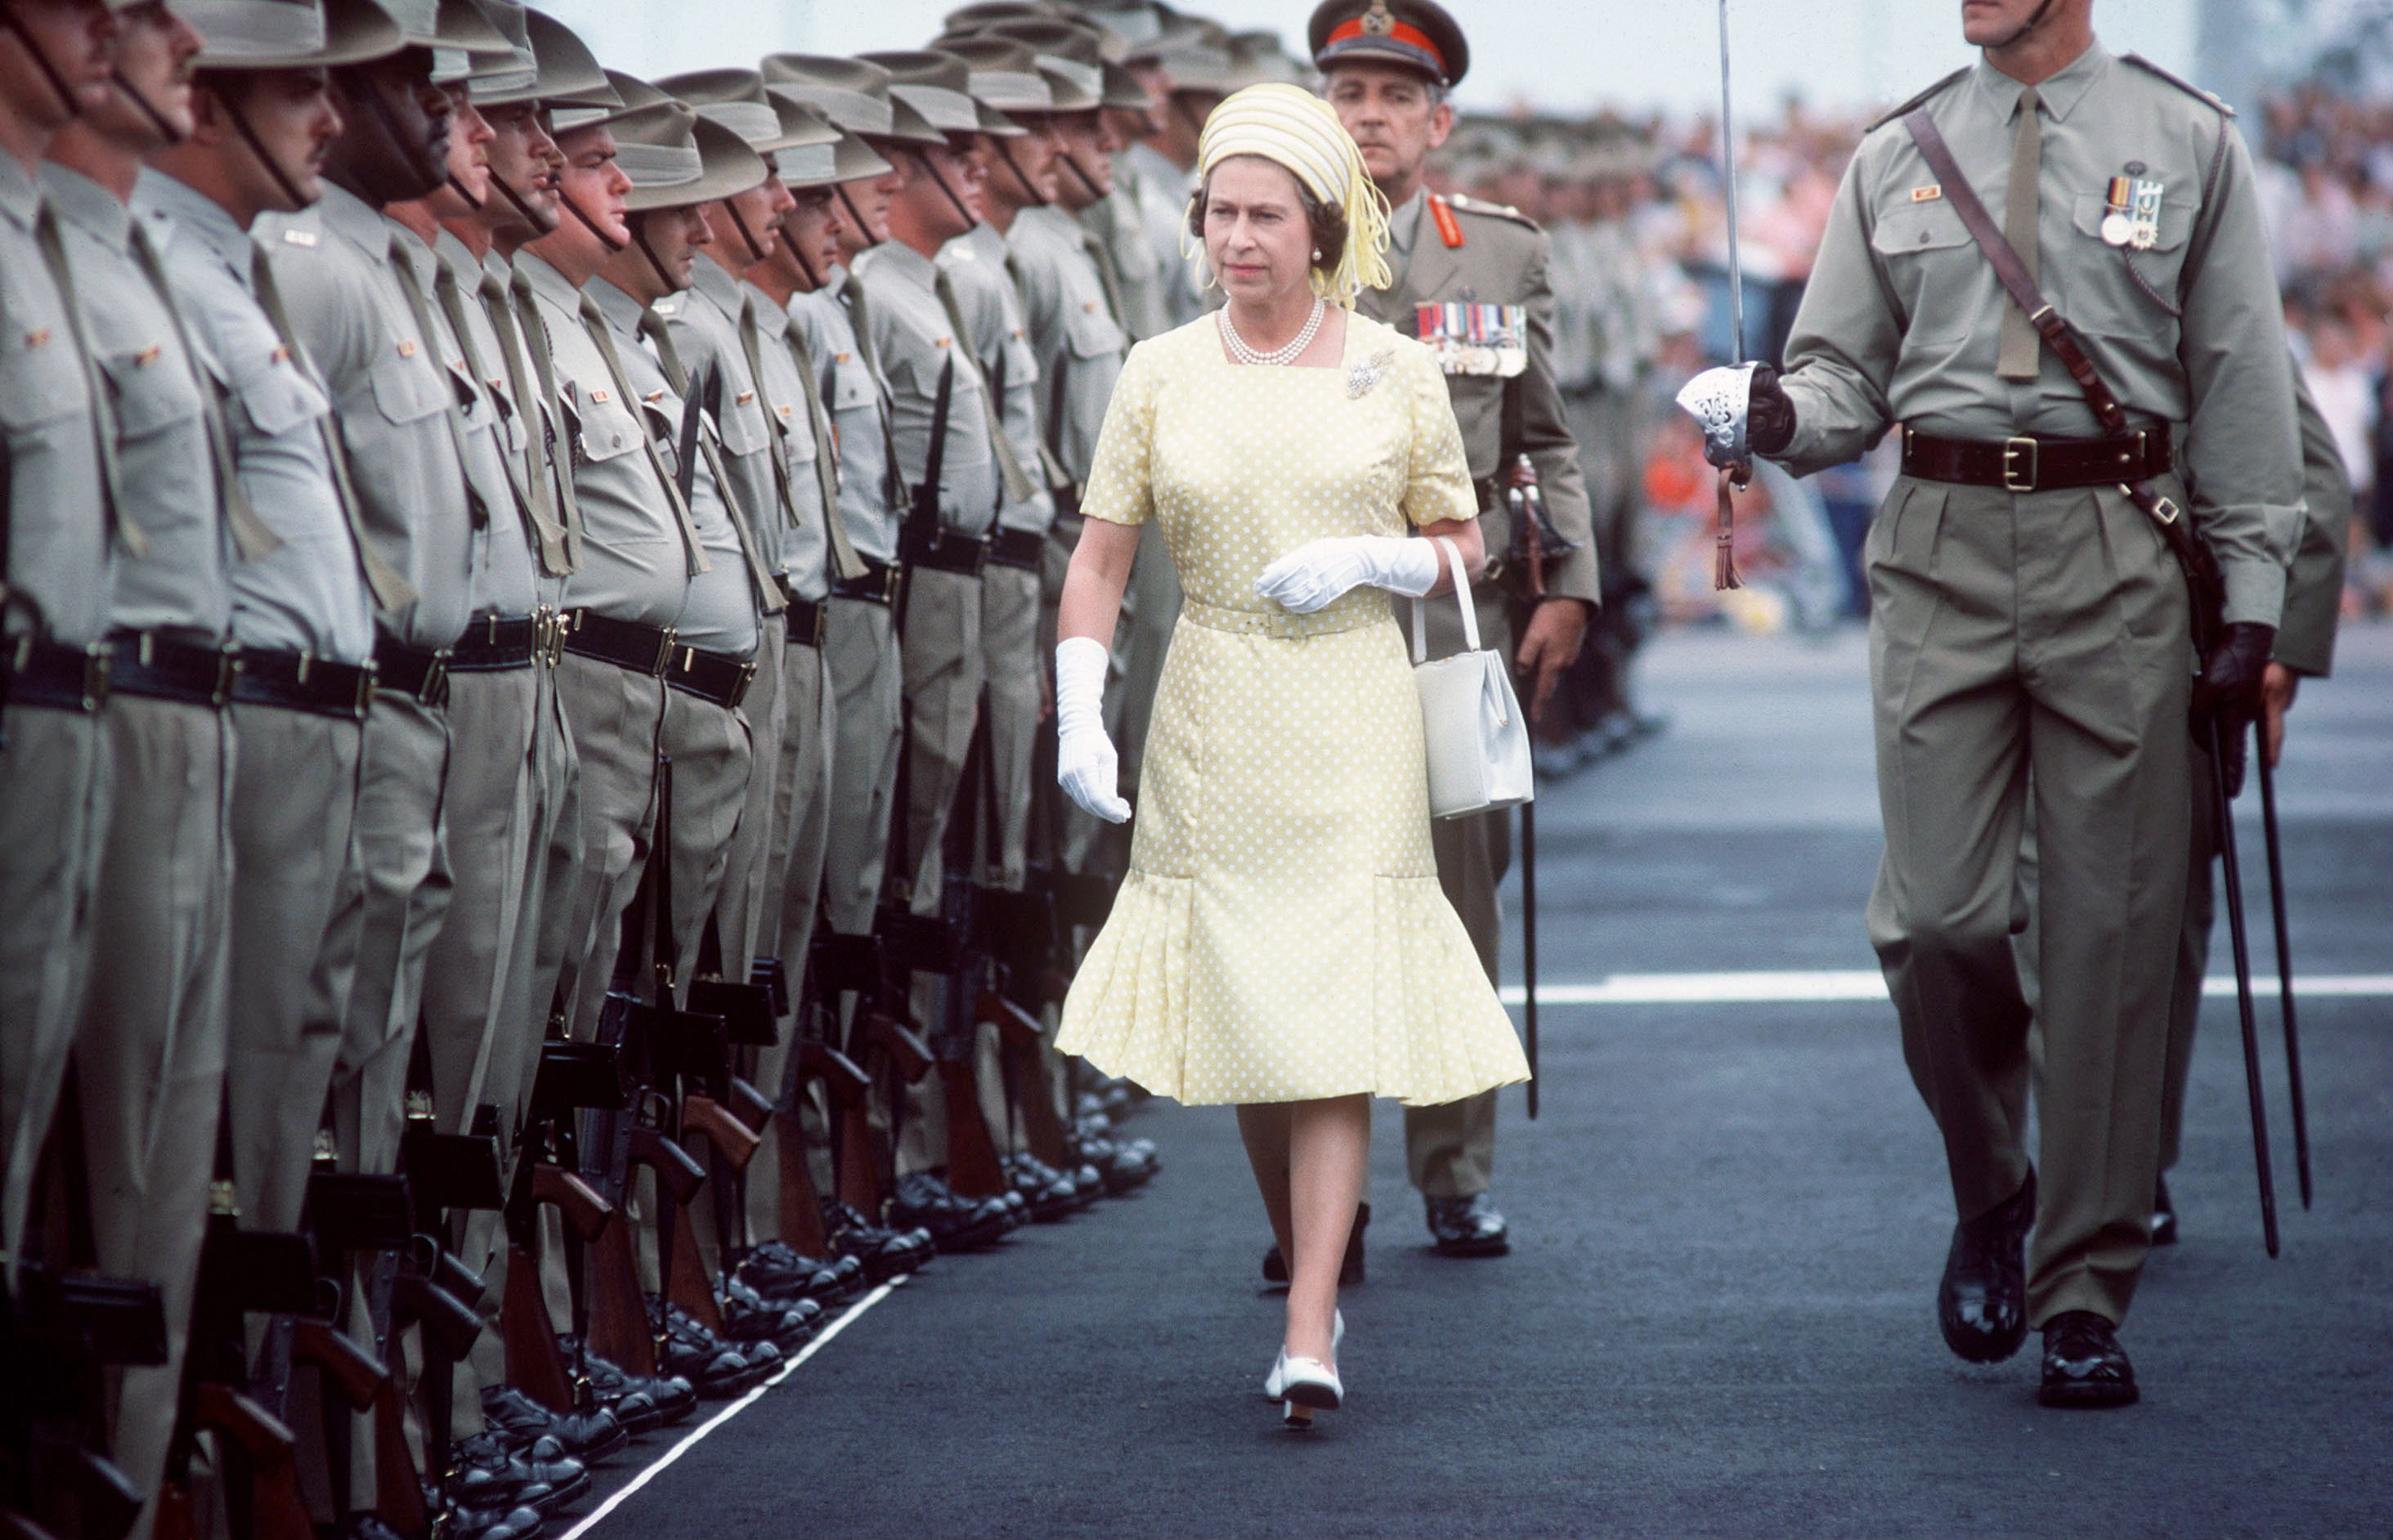 Queen Elizabeth II with troops during the Silver Jubilee